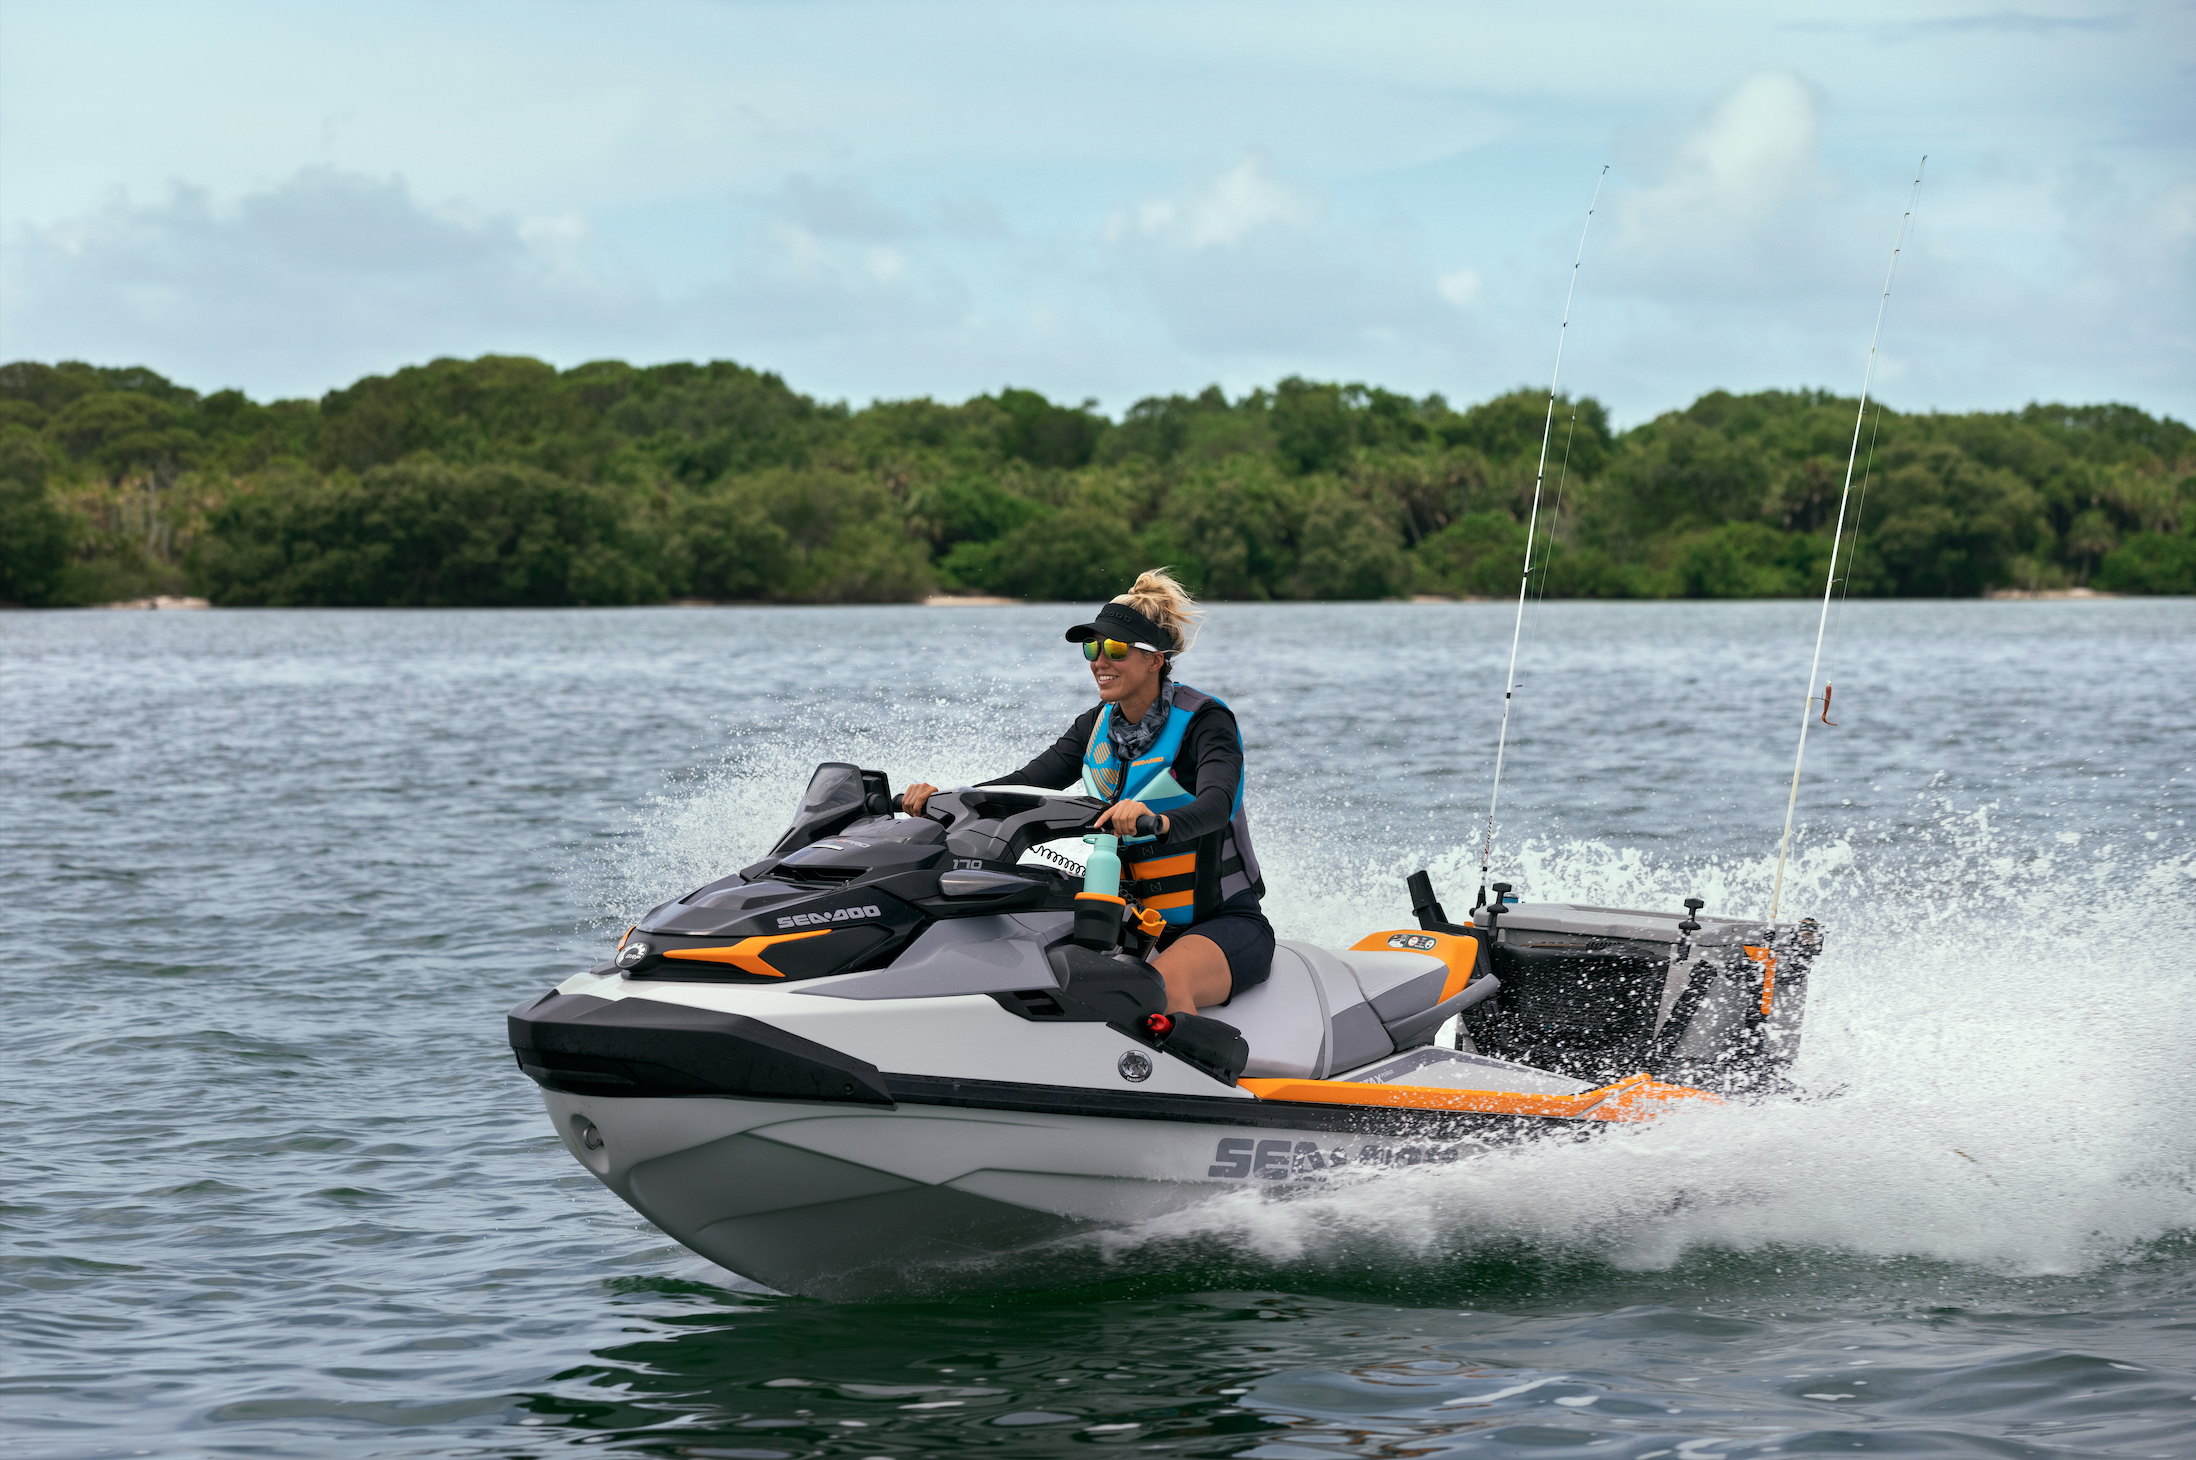 FISHING ON ANOTHER LEVEL WITH THE ALL-NEW 2022 SEA-DOO FISH PRO FAMILY